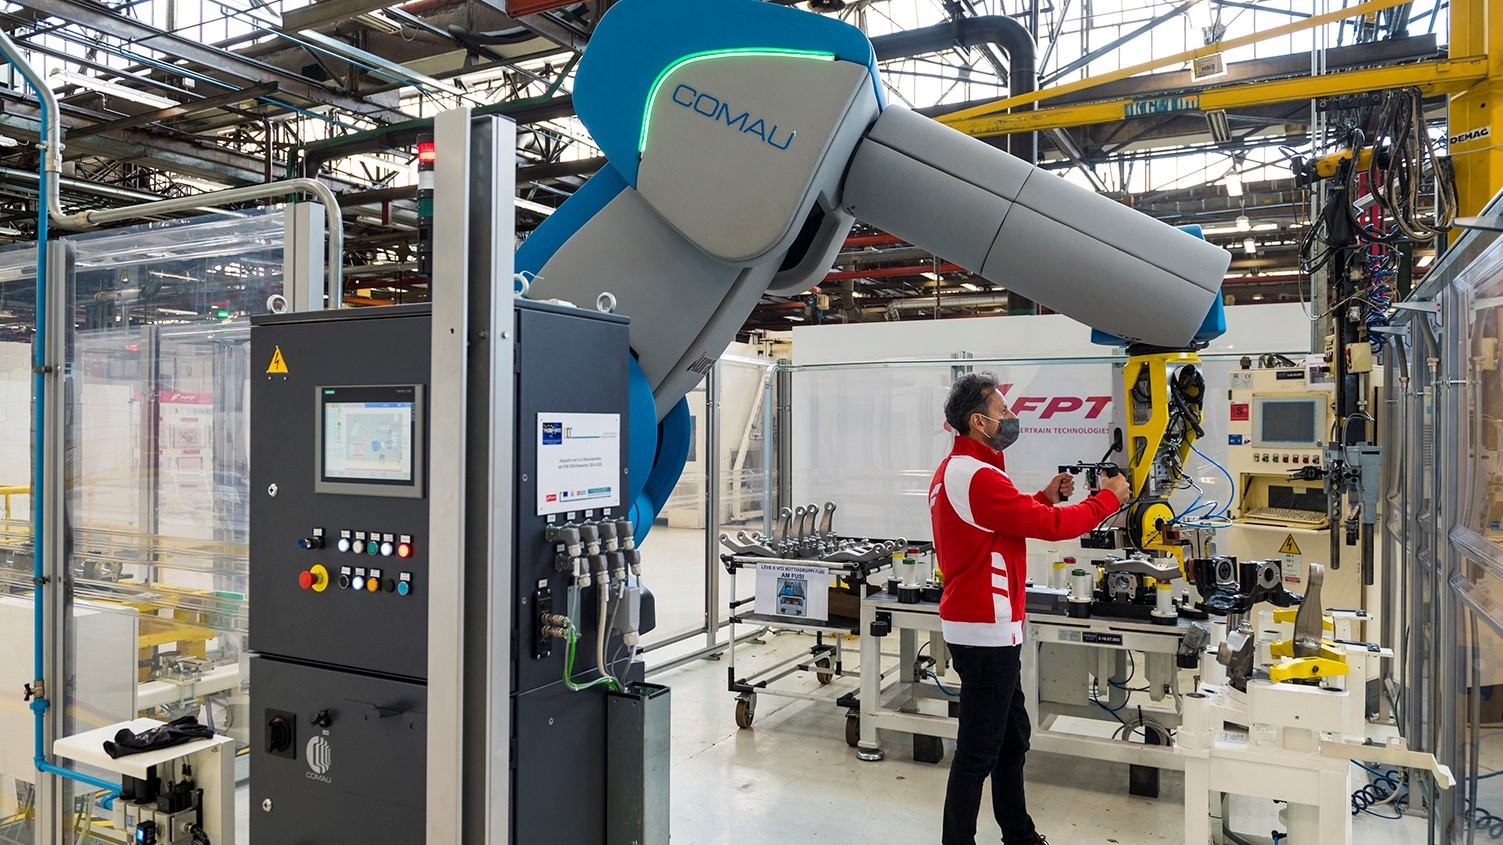 ROBOTS PARTNERING WITH HUMANS: AT FPT INDUSTRIAL FACTORY 4.0 IS ALREADY A REALITY THANKS TO COLLABORATION WITH COMAU